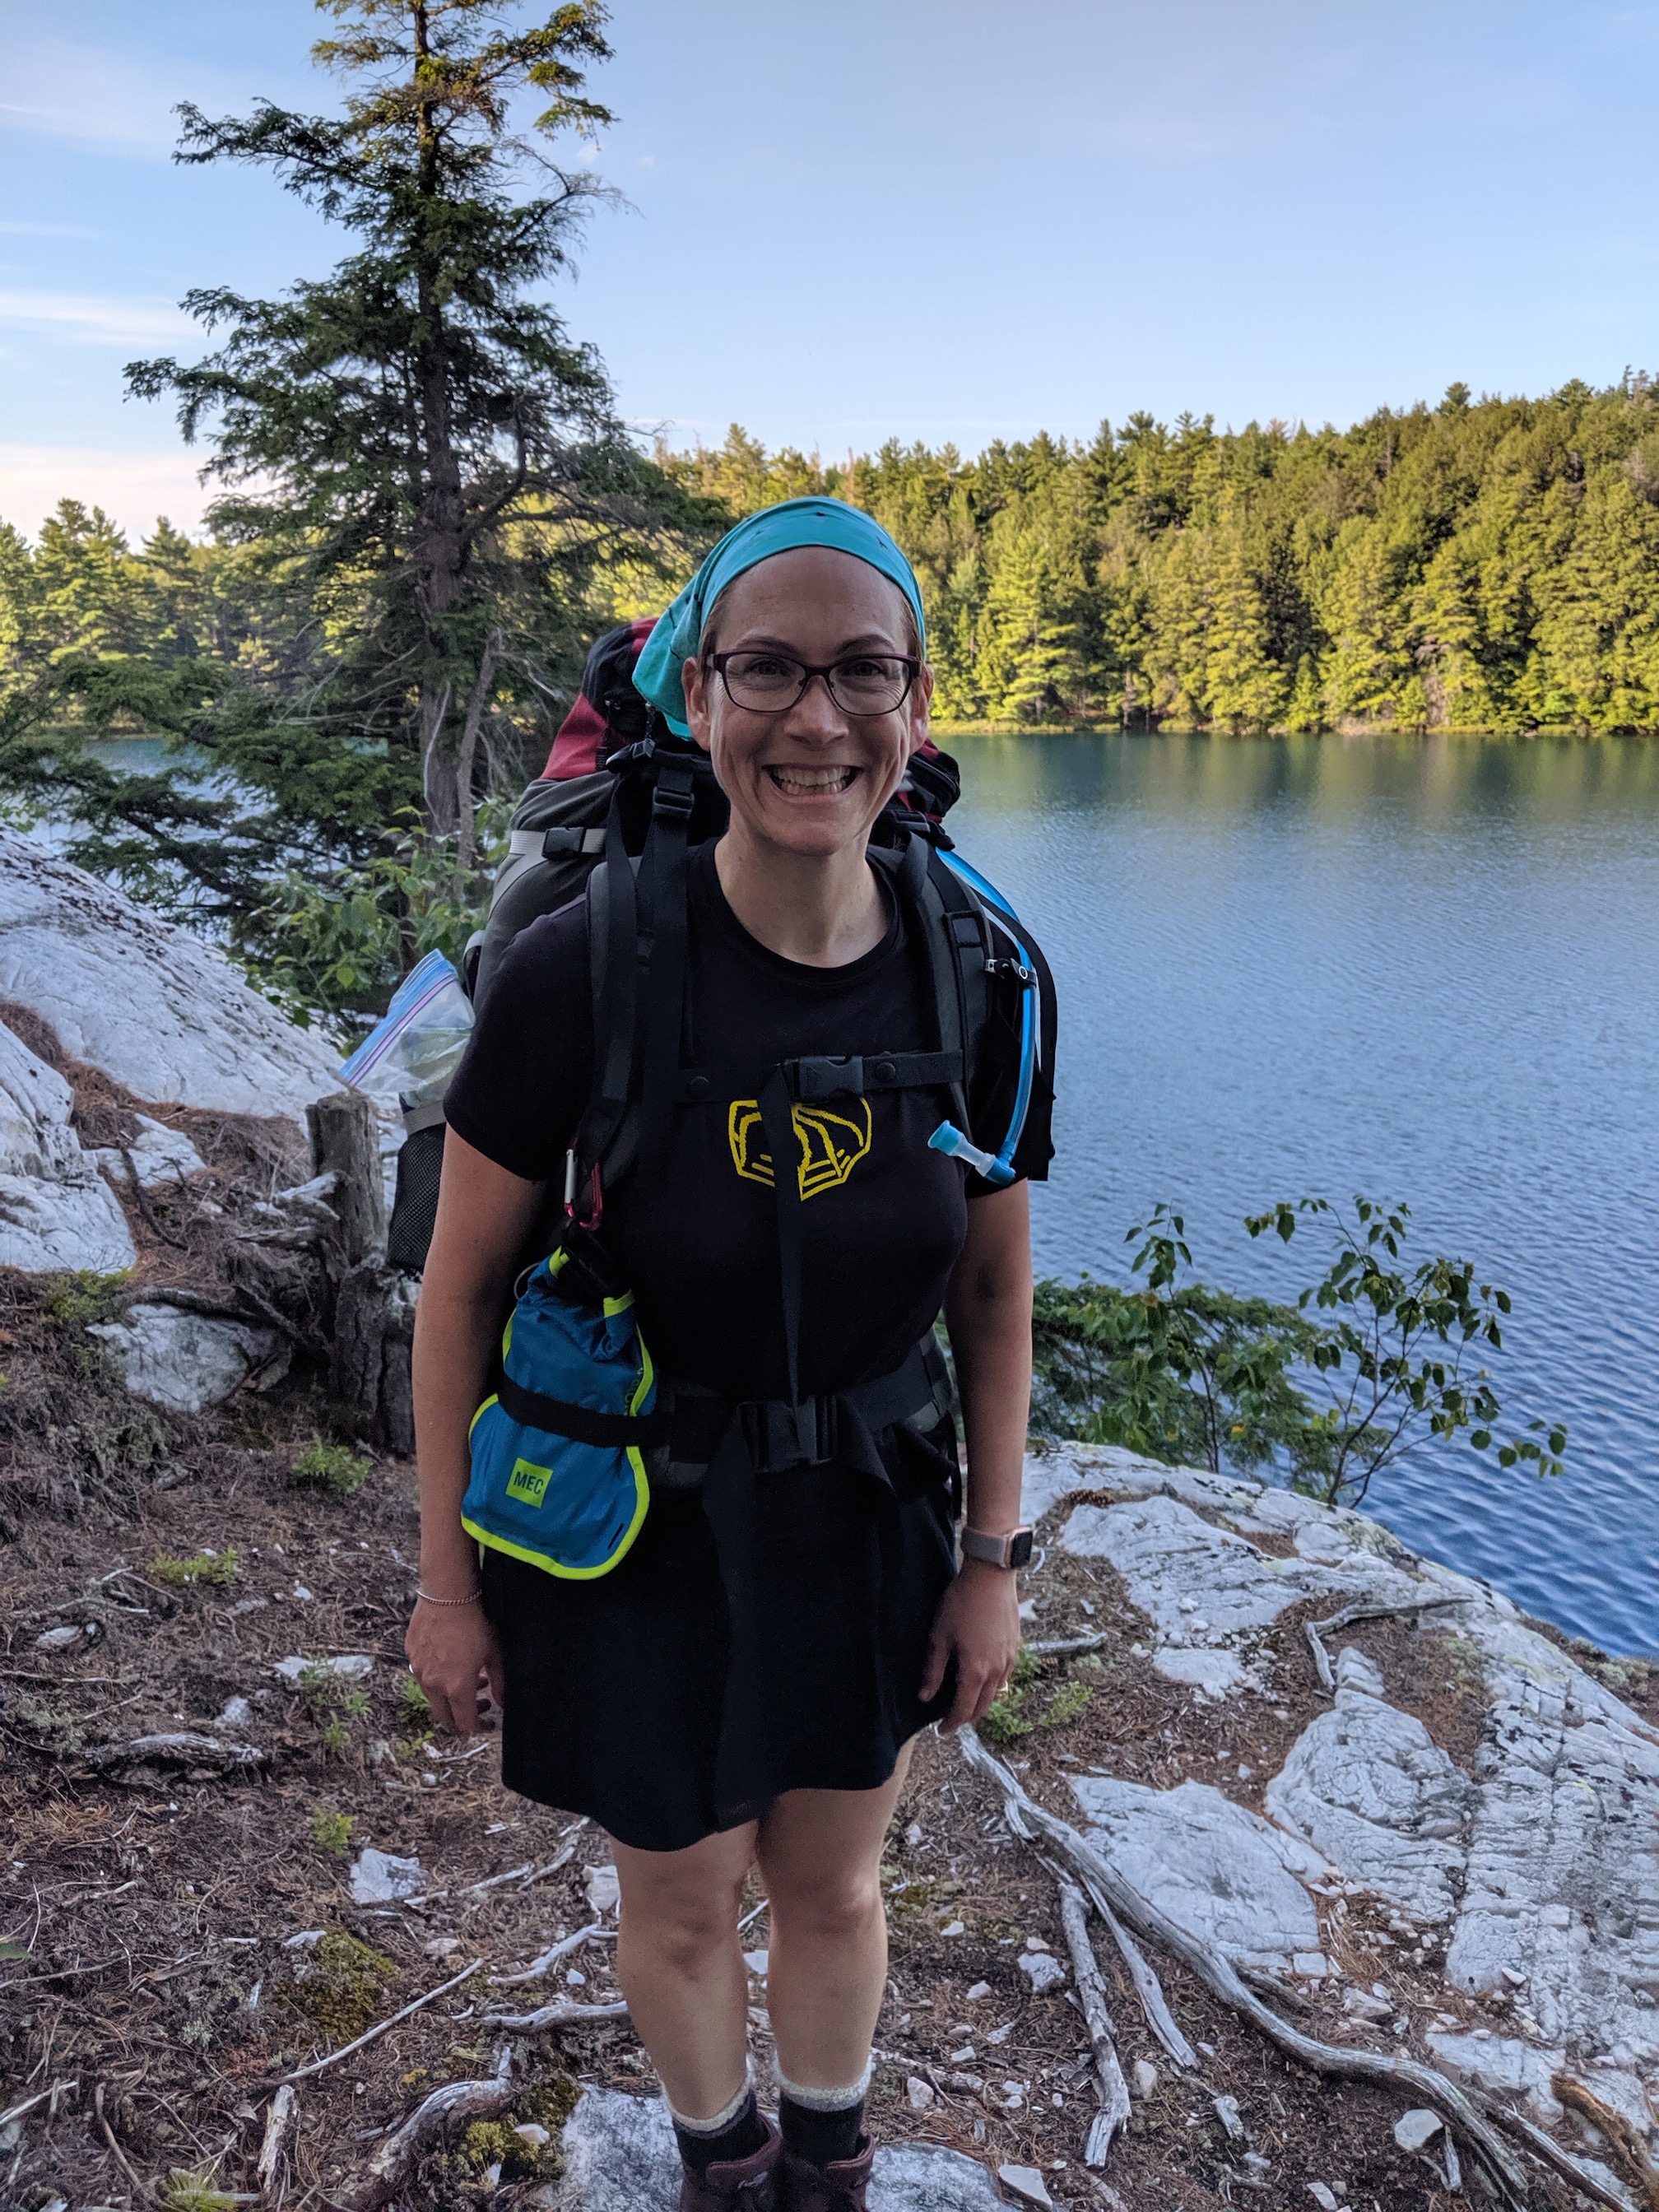 Me in a black Tshirt with a yellow spider on it (an old Torontula jersey from a long-ago phase of my life), a black skort, a teal bandanna, and a hiking pack with a blue dry bag tucked into the waist strap. I am standing in front of a lake surrounded by trees.